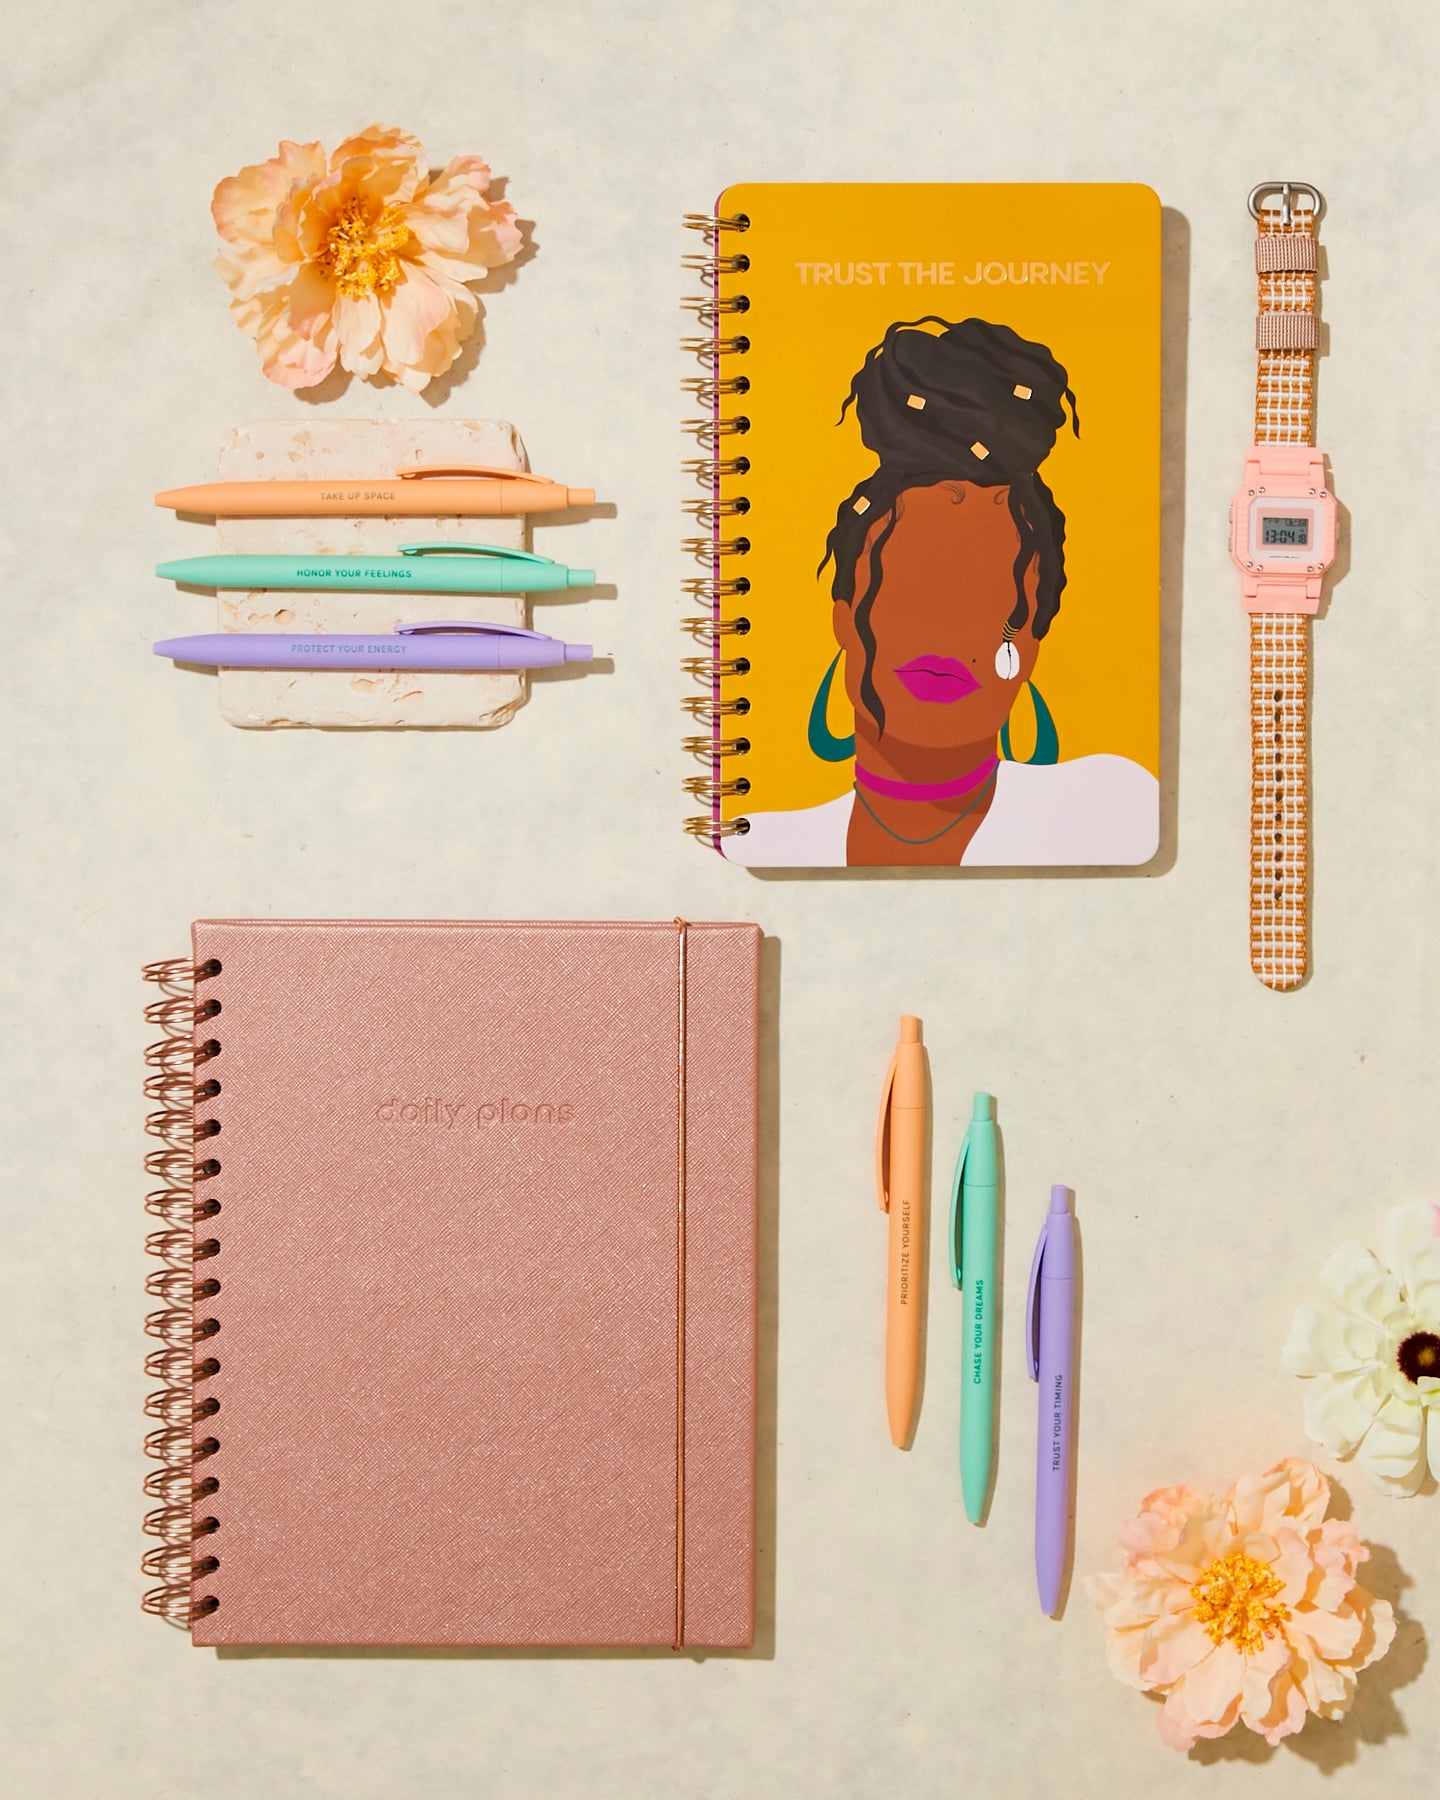 How to use a Planner Effectively: The Trifecta